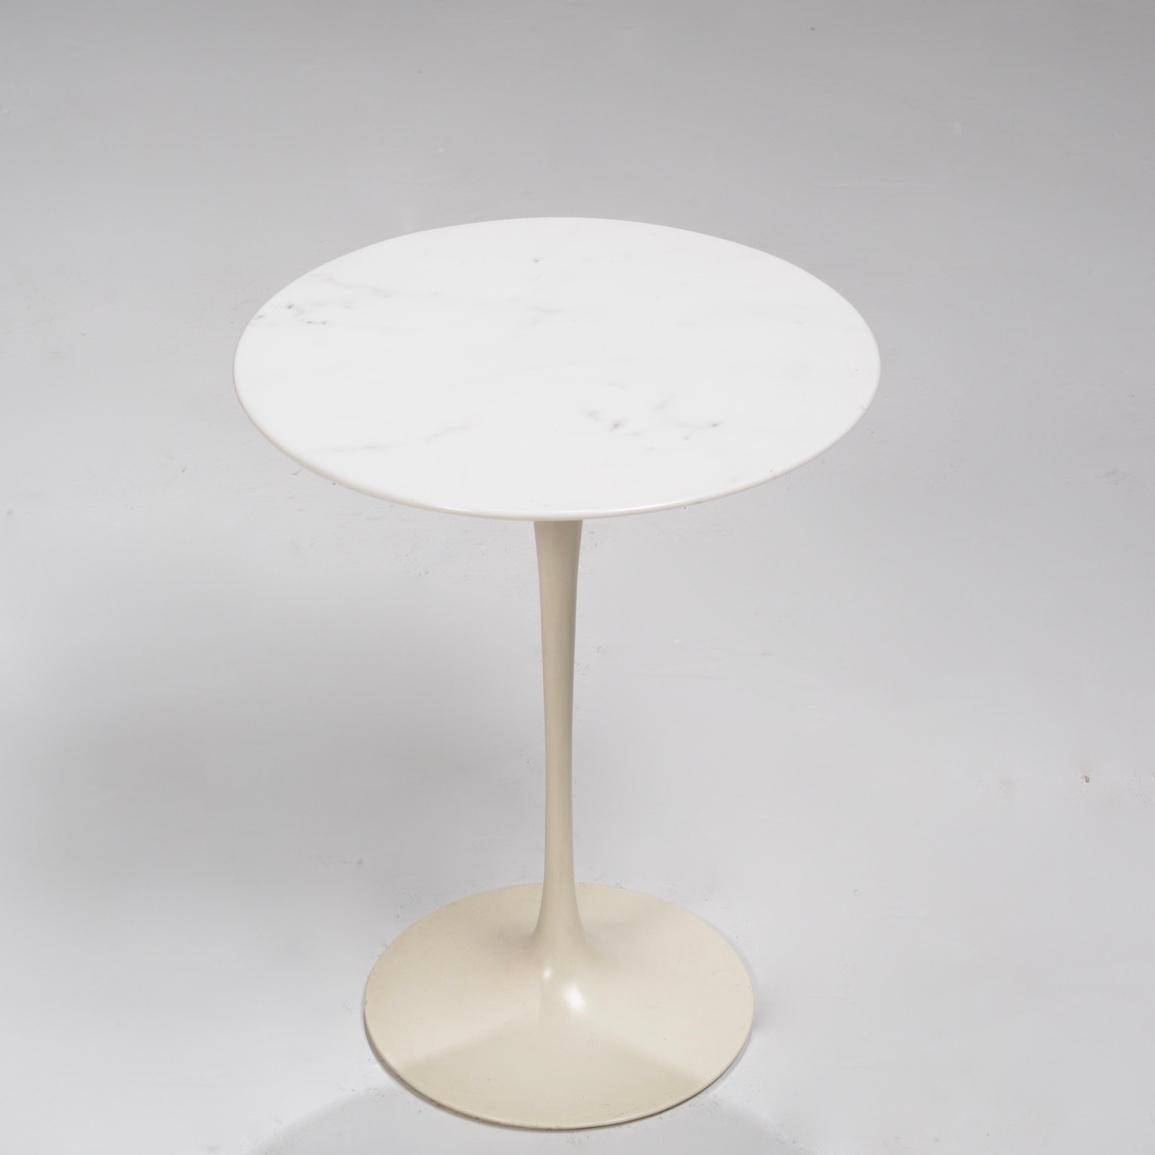 Eero Saarinen Tulip side table for Knoll International.
Beautiful marble top, white enameled metal base. 
Good original condition, marked with Knoll label. 
 